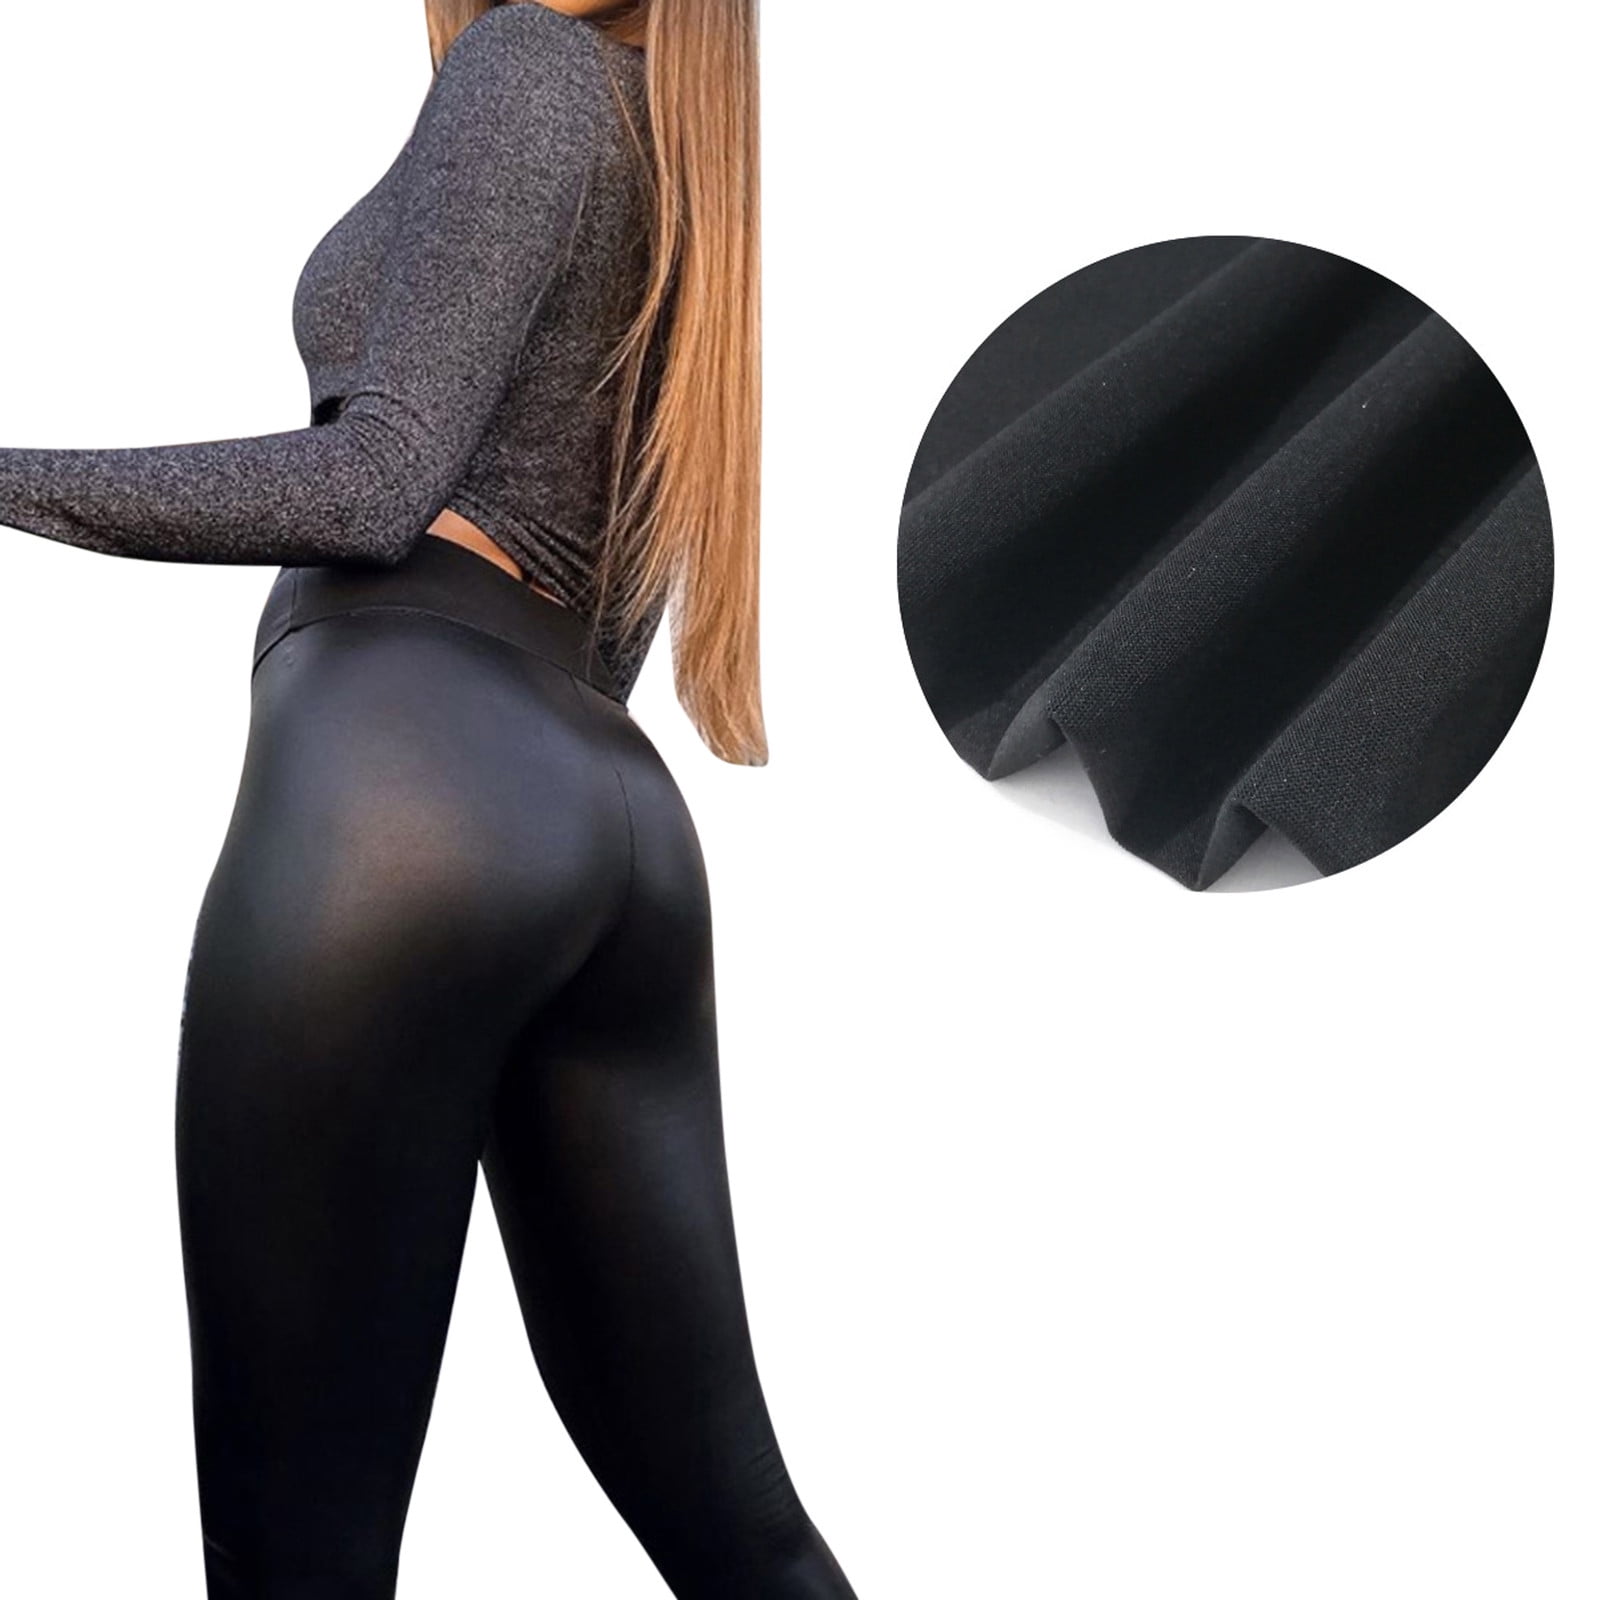 Ritatte Thick Fleece Lined Tights for Women, Fake Warm Translucent  Pantyhose, Stretchy High Waist Sheer Solid Leggings